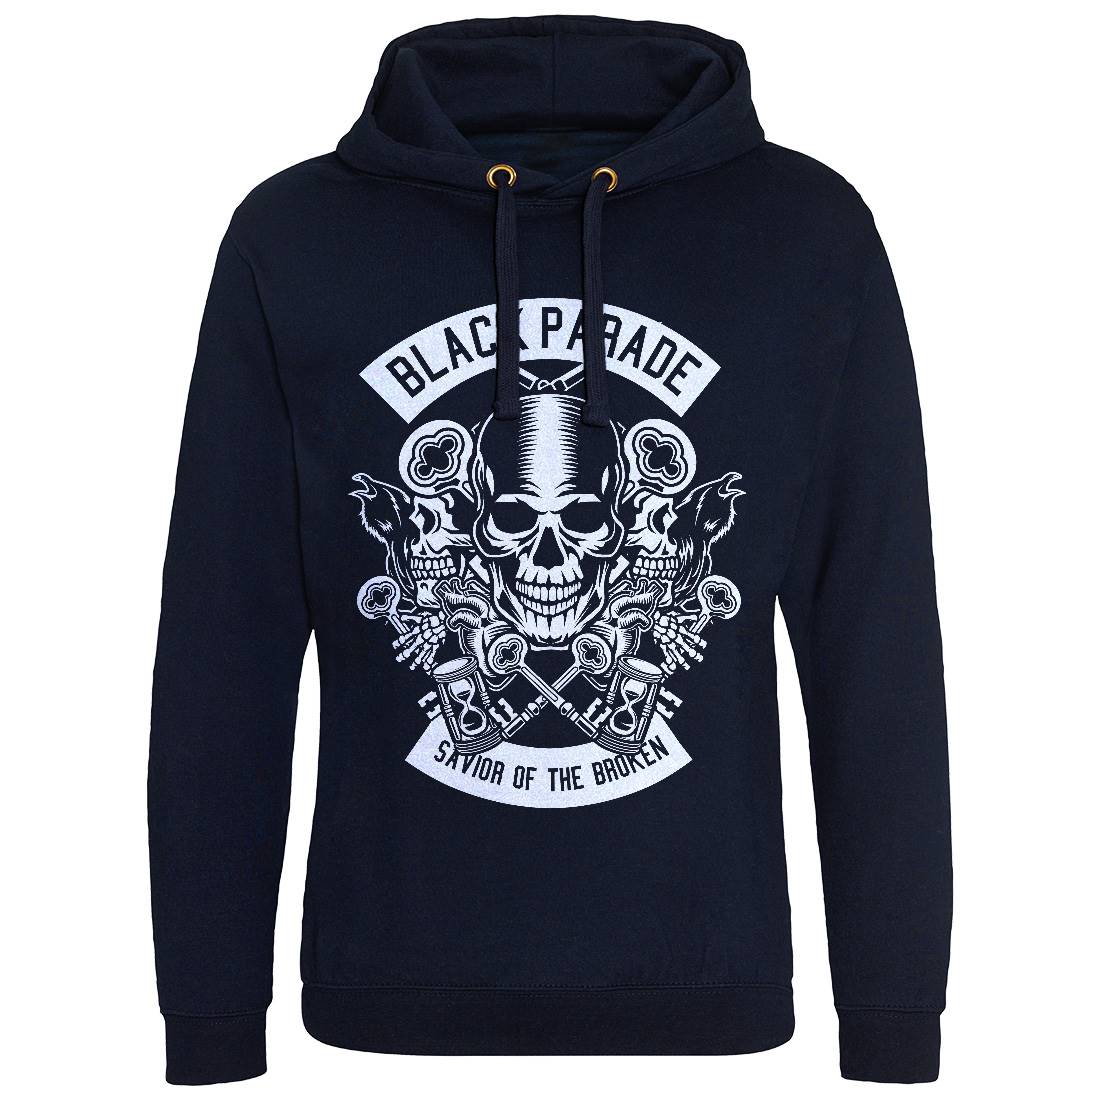 Black Parade Mens Hoodie Without Pocket Horror B501